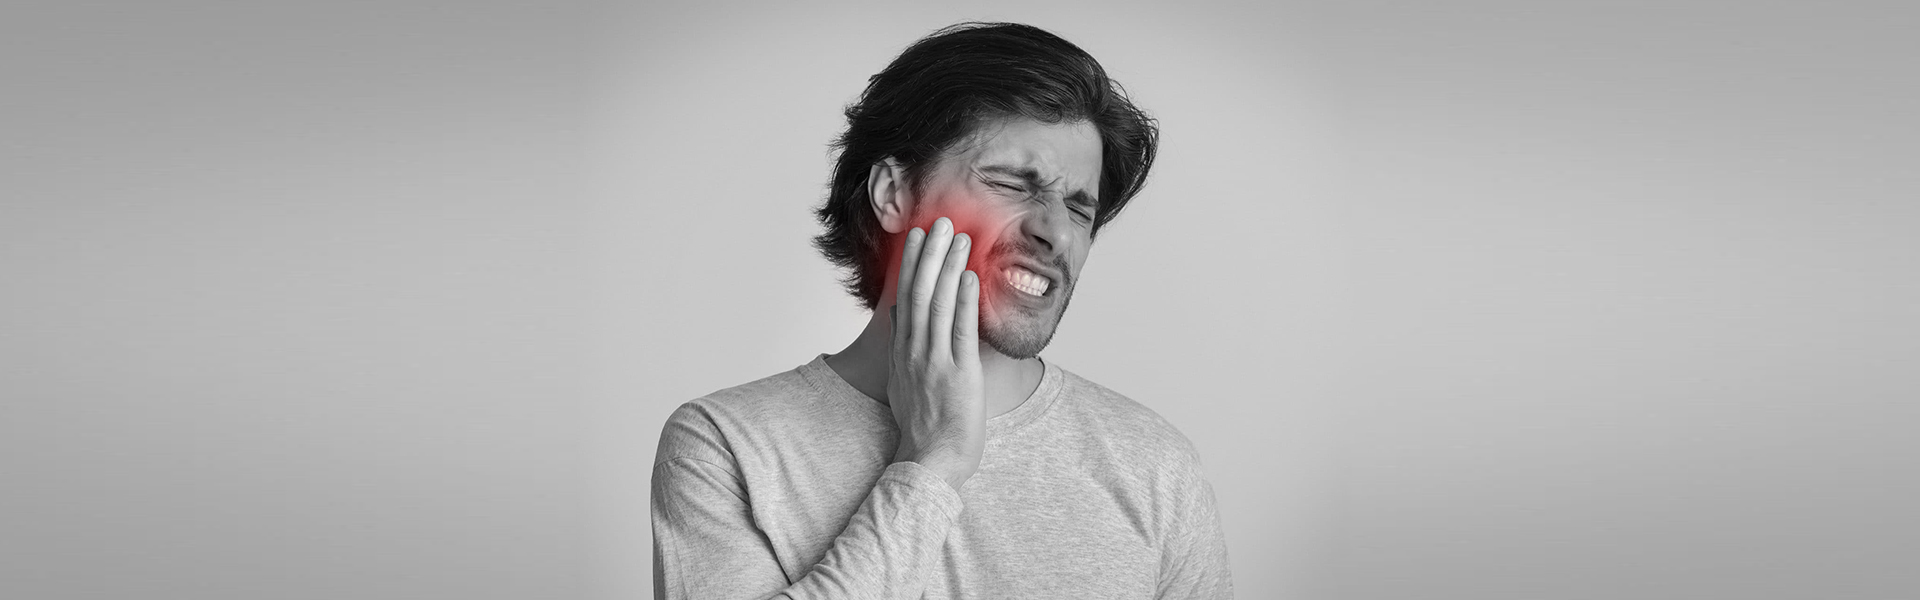 Signs that You Need TMJ/TMD Treatment